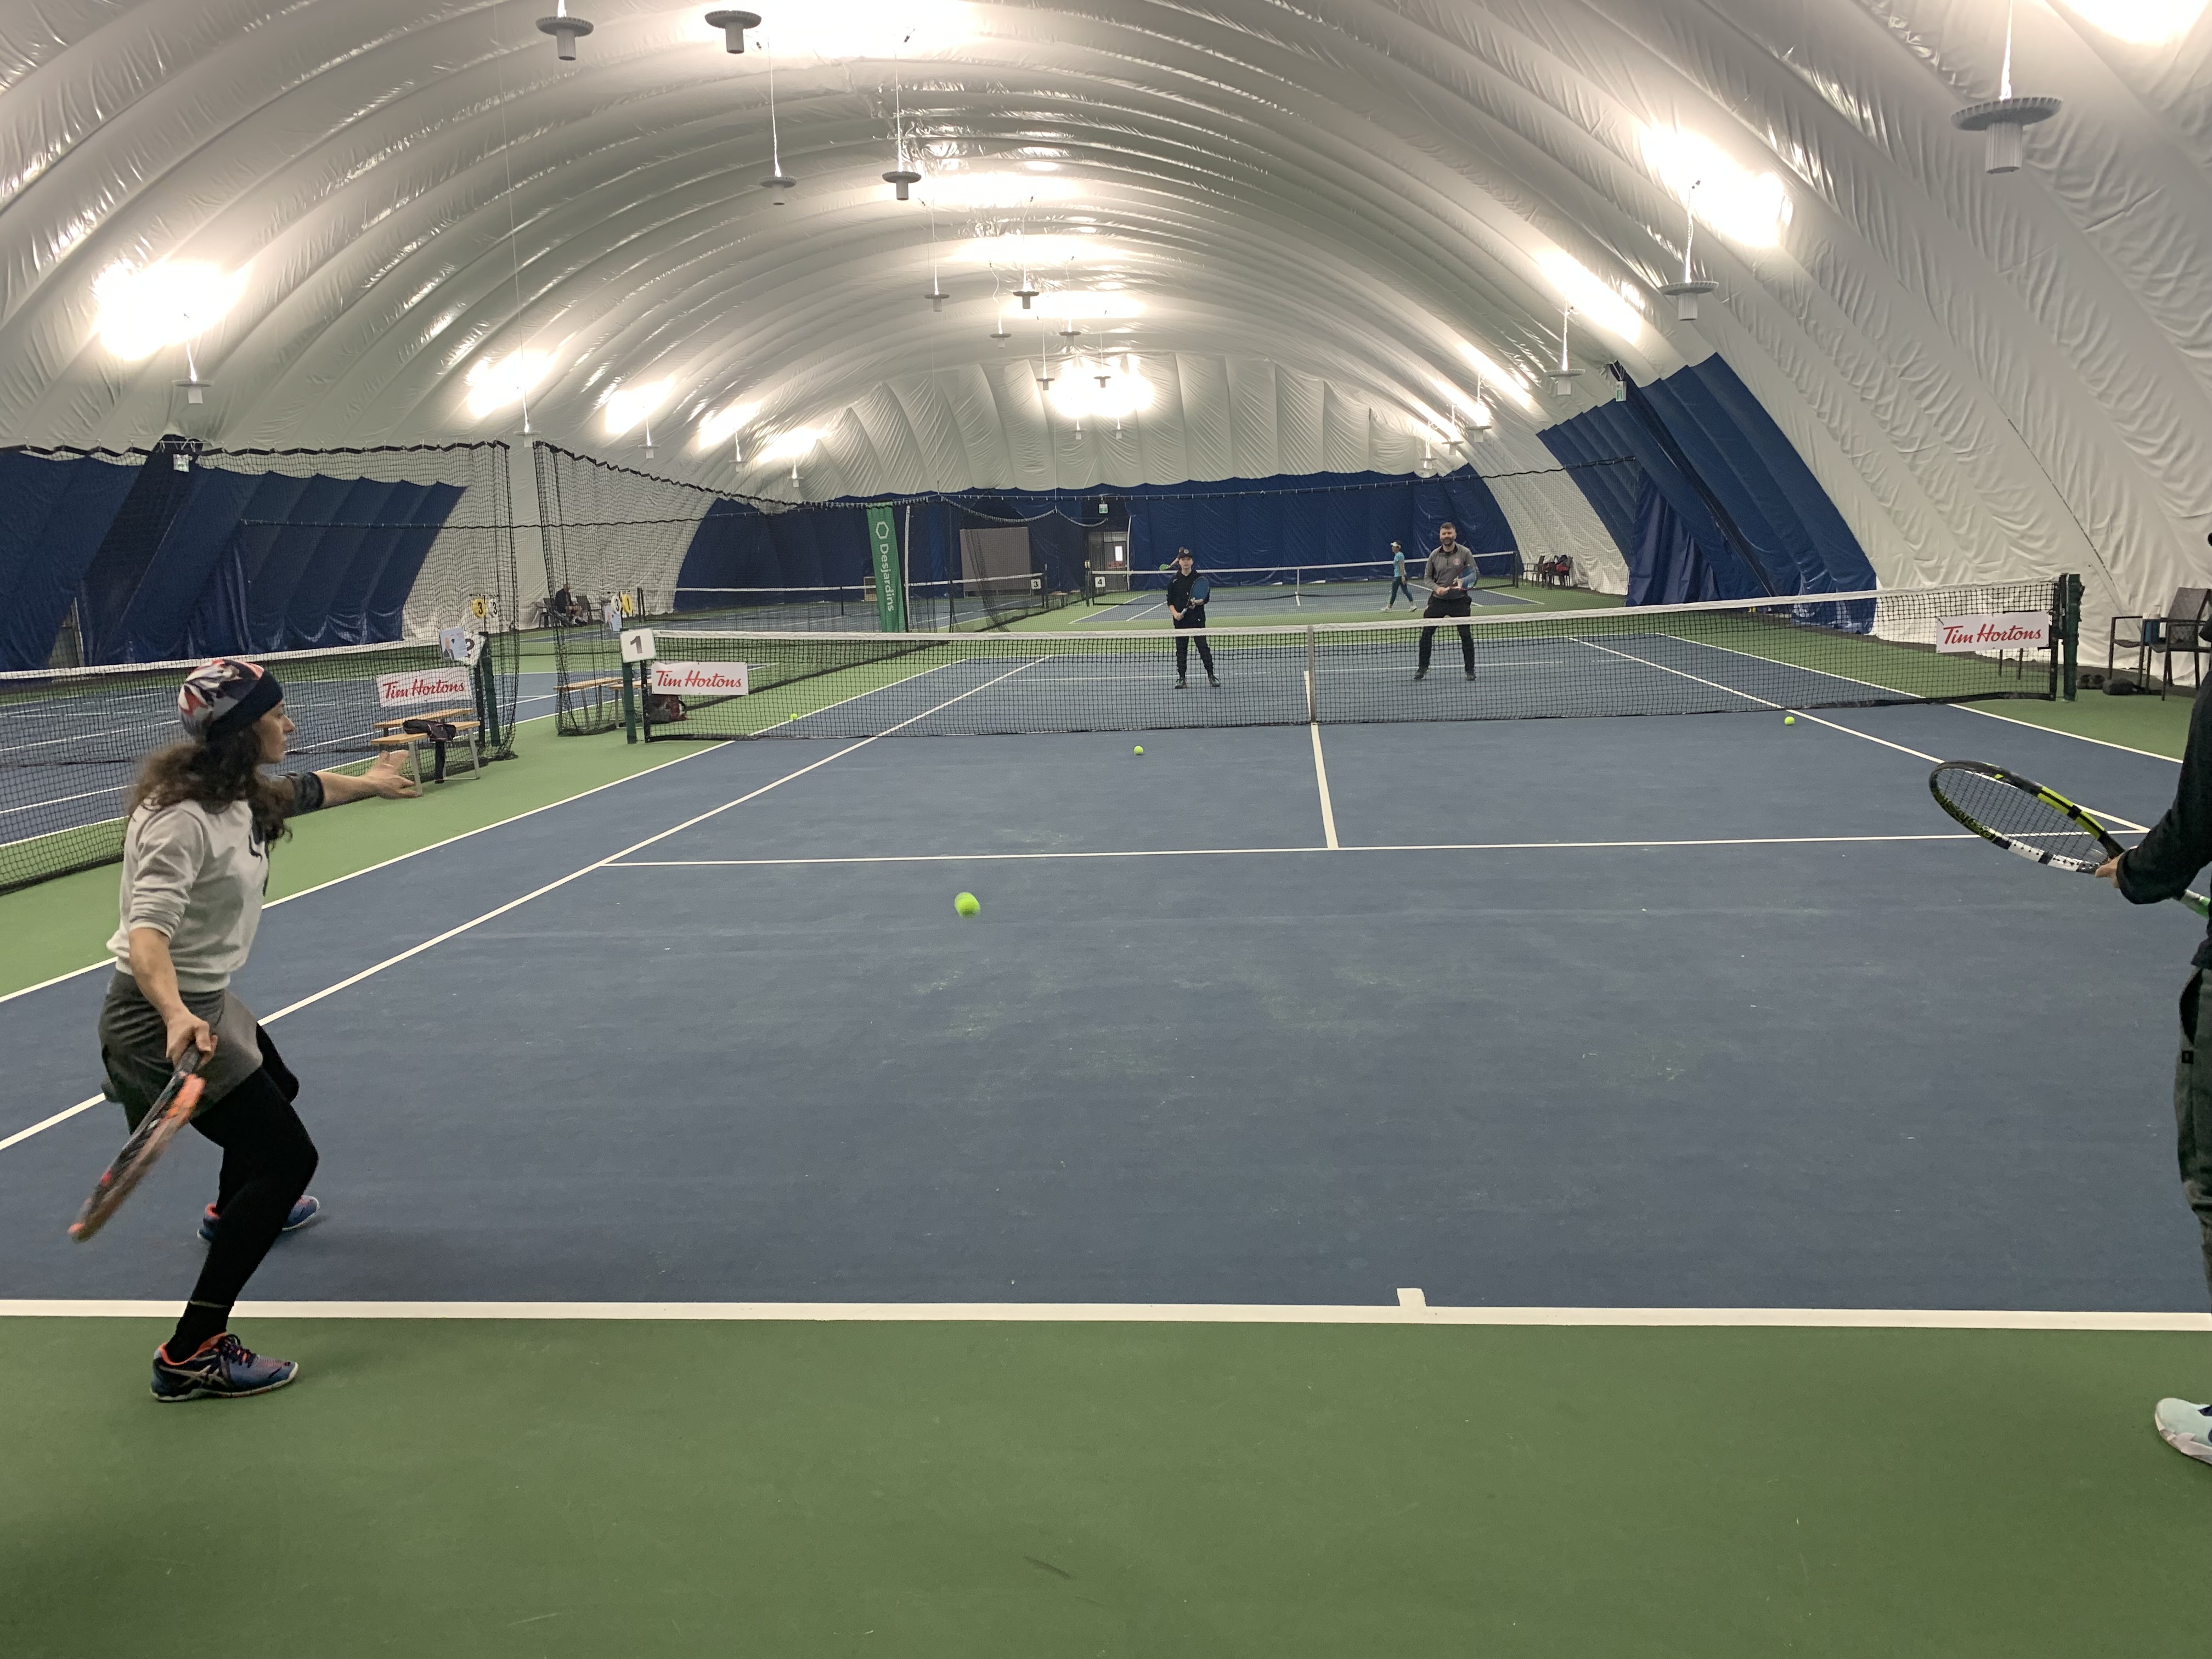 Inflatable domes a big hit for Quebec’s indoor tennis players